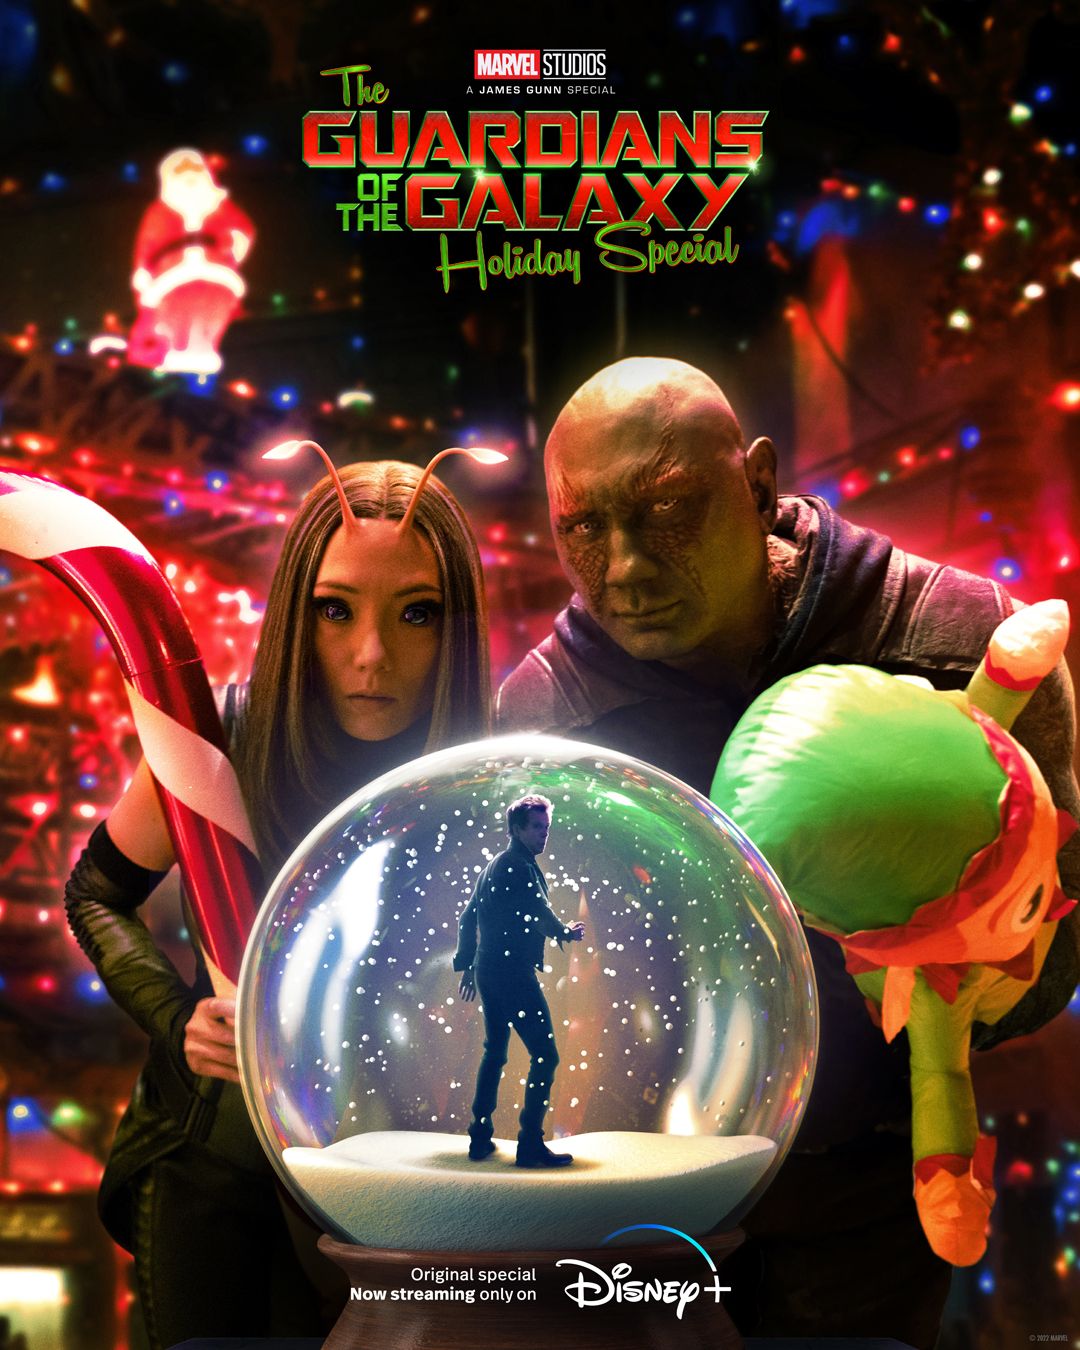 Guardians of the Galaxy Holiday Special Poster